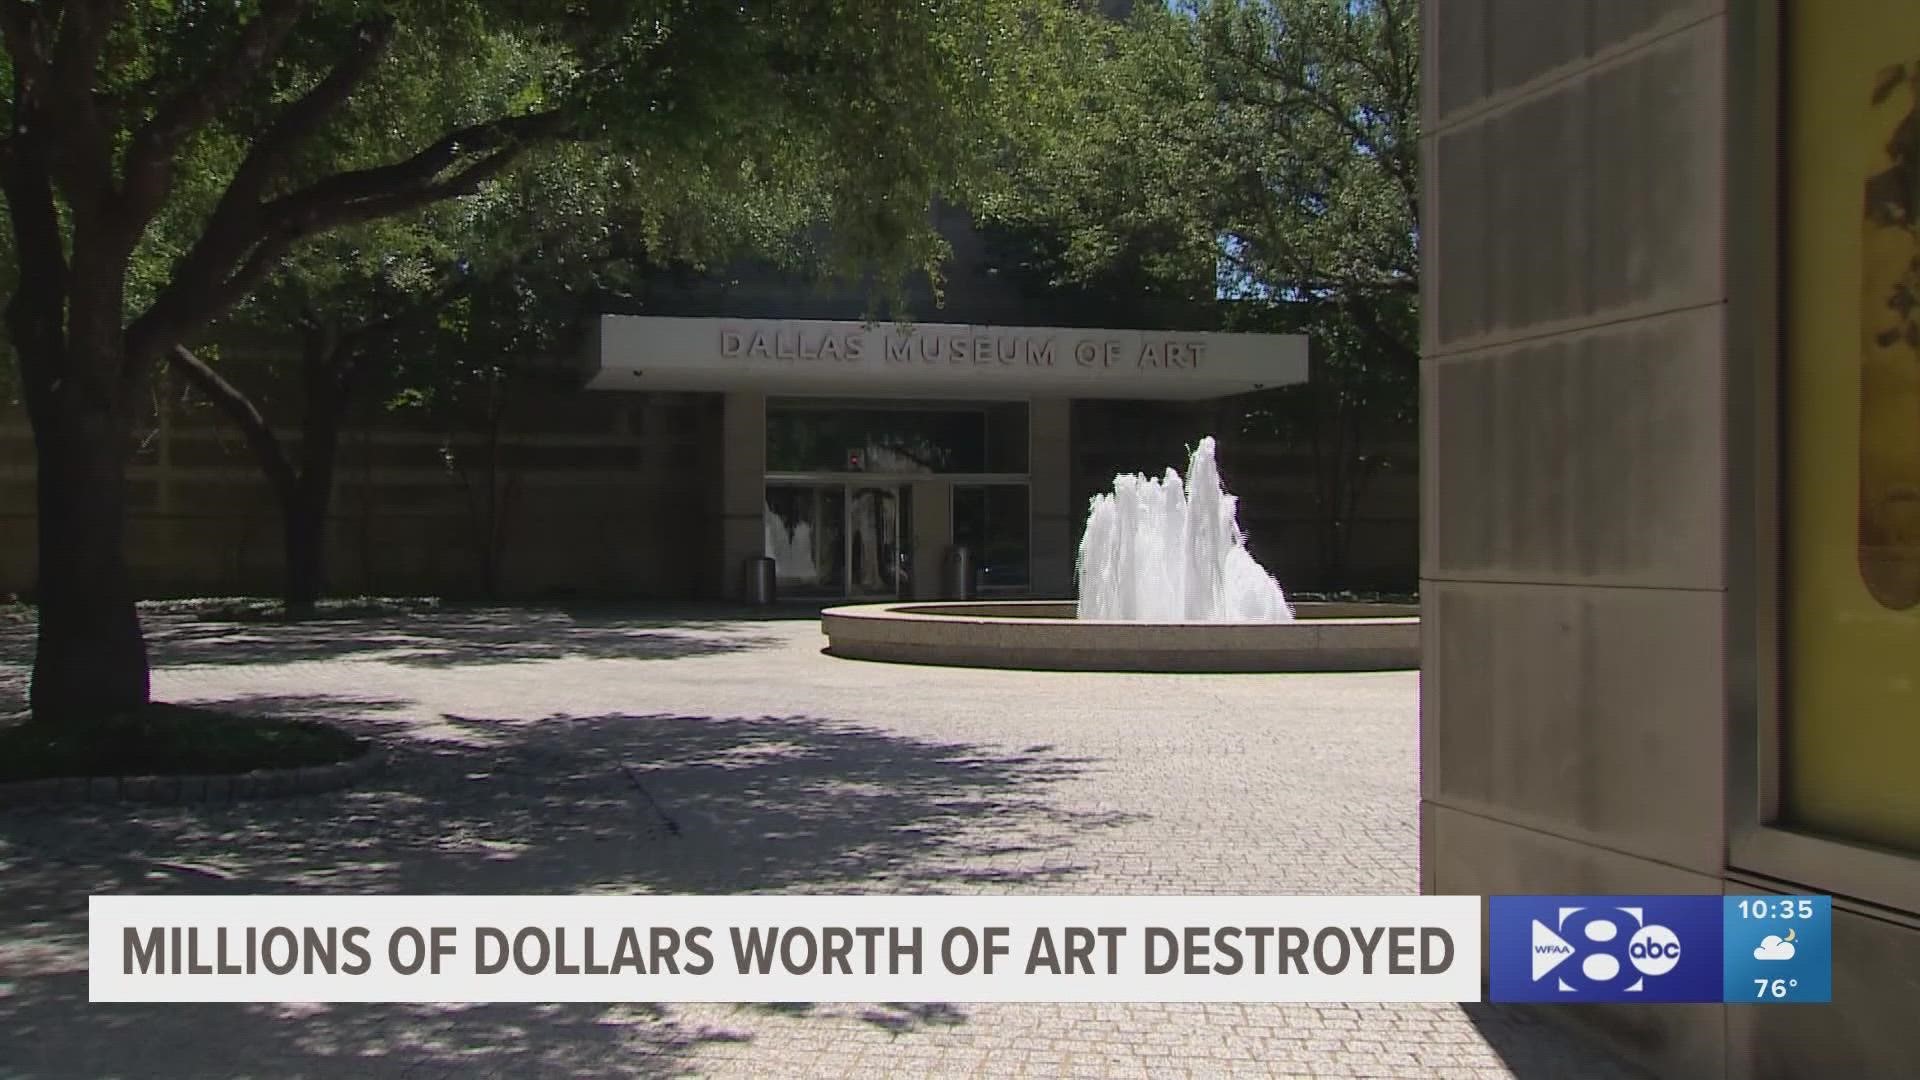 More than $5 million in property, including ancient artifacts, statues and pottery, was destroyed after a man broke into the Dallas Museum of Art, police say.